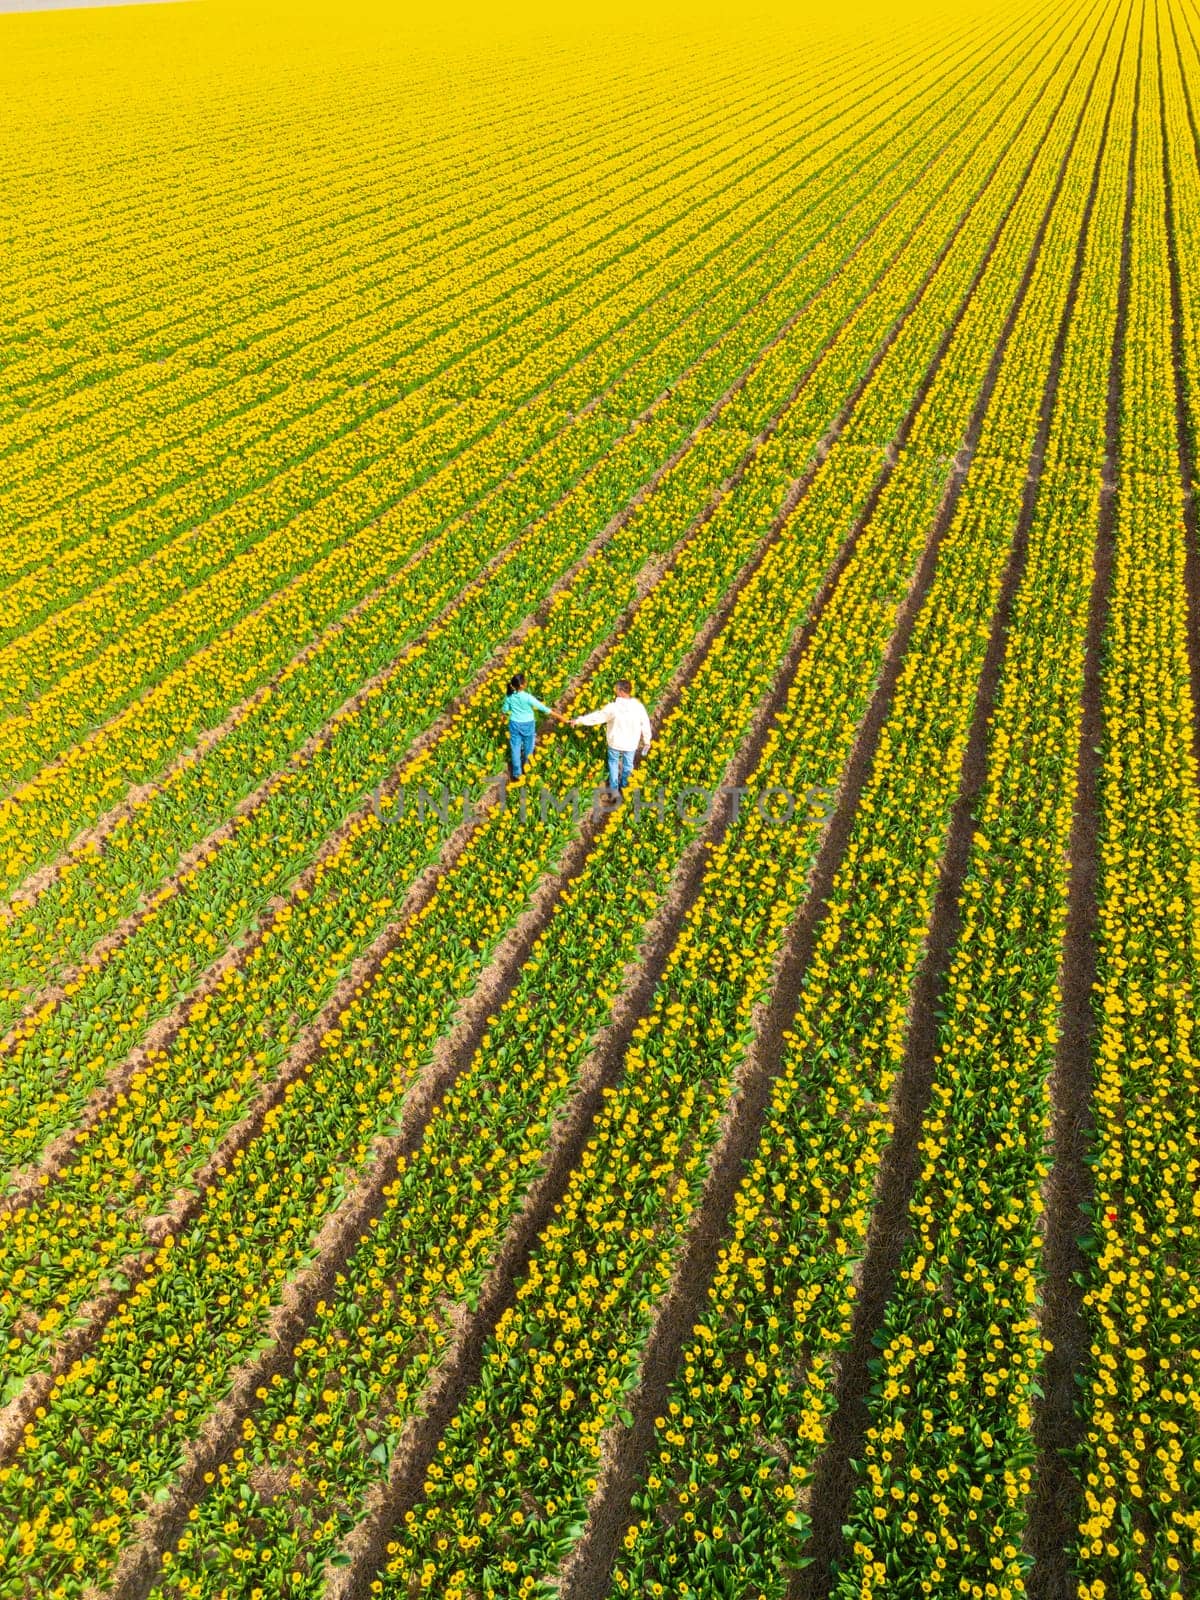 Men and women in flower fields seen from above with a drone in the Netherlands, Tulip fields Spring by fokkebok